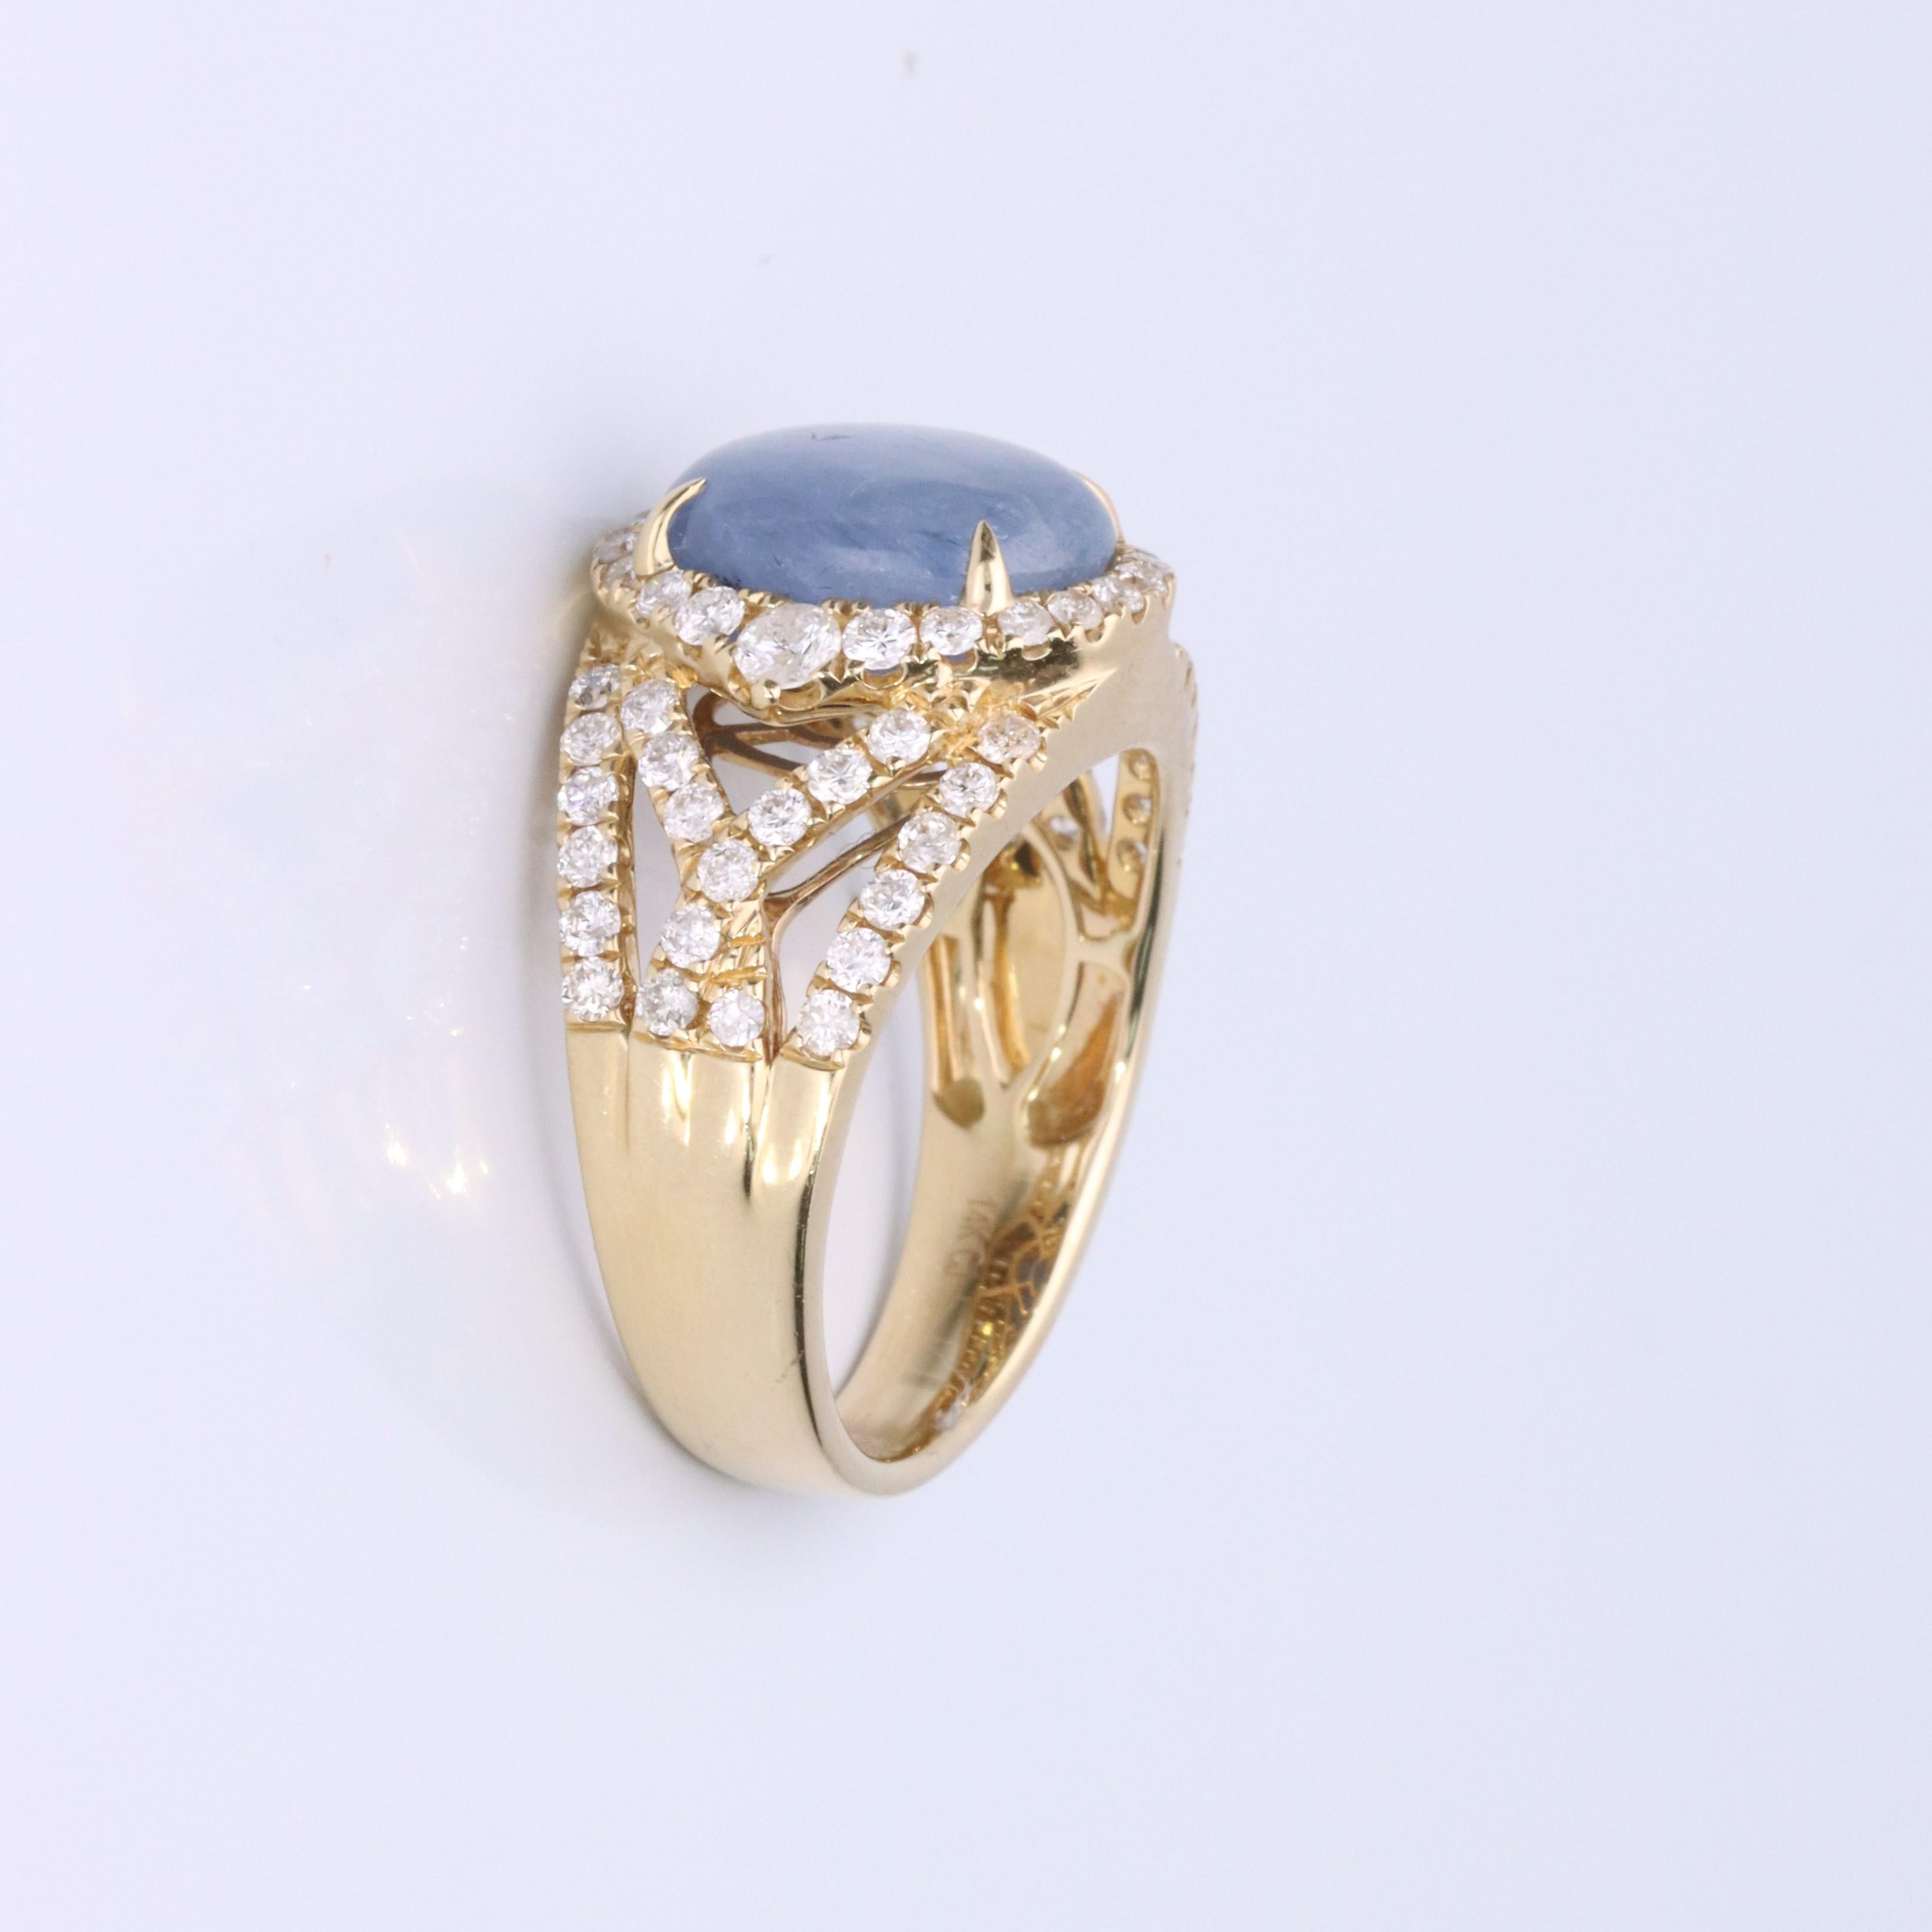 Decorate yourself in elegance with this Ring is crafted from 14-karat Yellow Gold by Gin & Grace. This Ring is made up of Oval-Cab (1 pcs) 6.43 carat Cat's Eye and Round-cut White Diamond (66 Pcs) 1.03 carat. This Ring is weight 5.05 grams. This